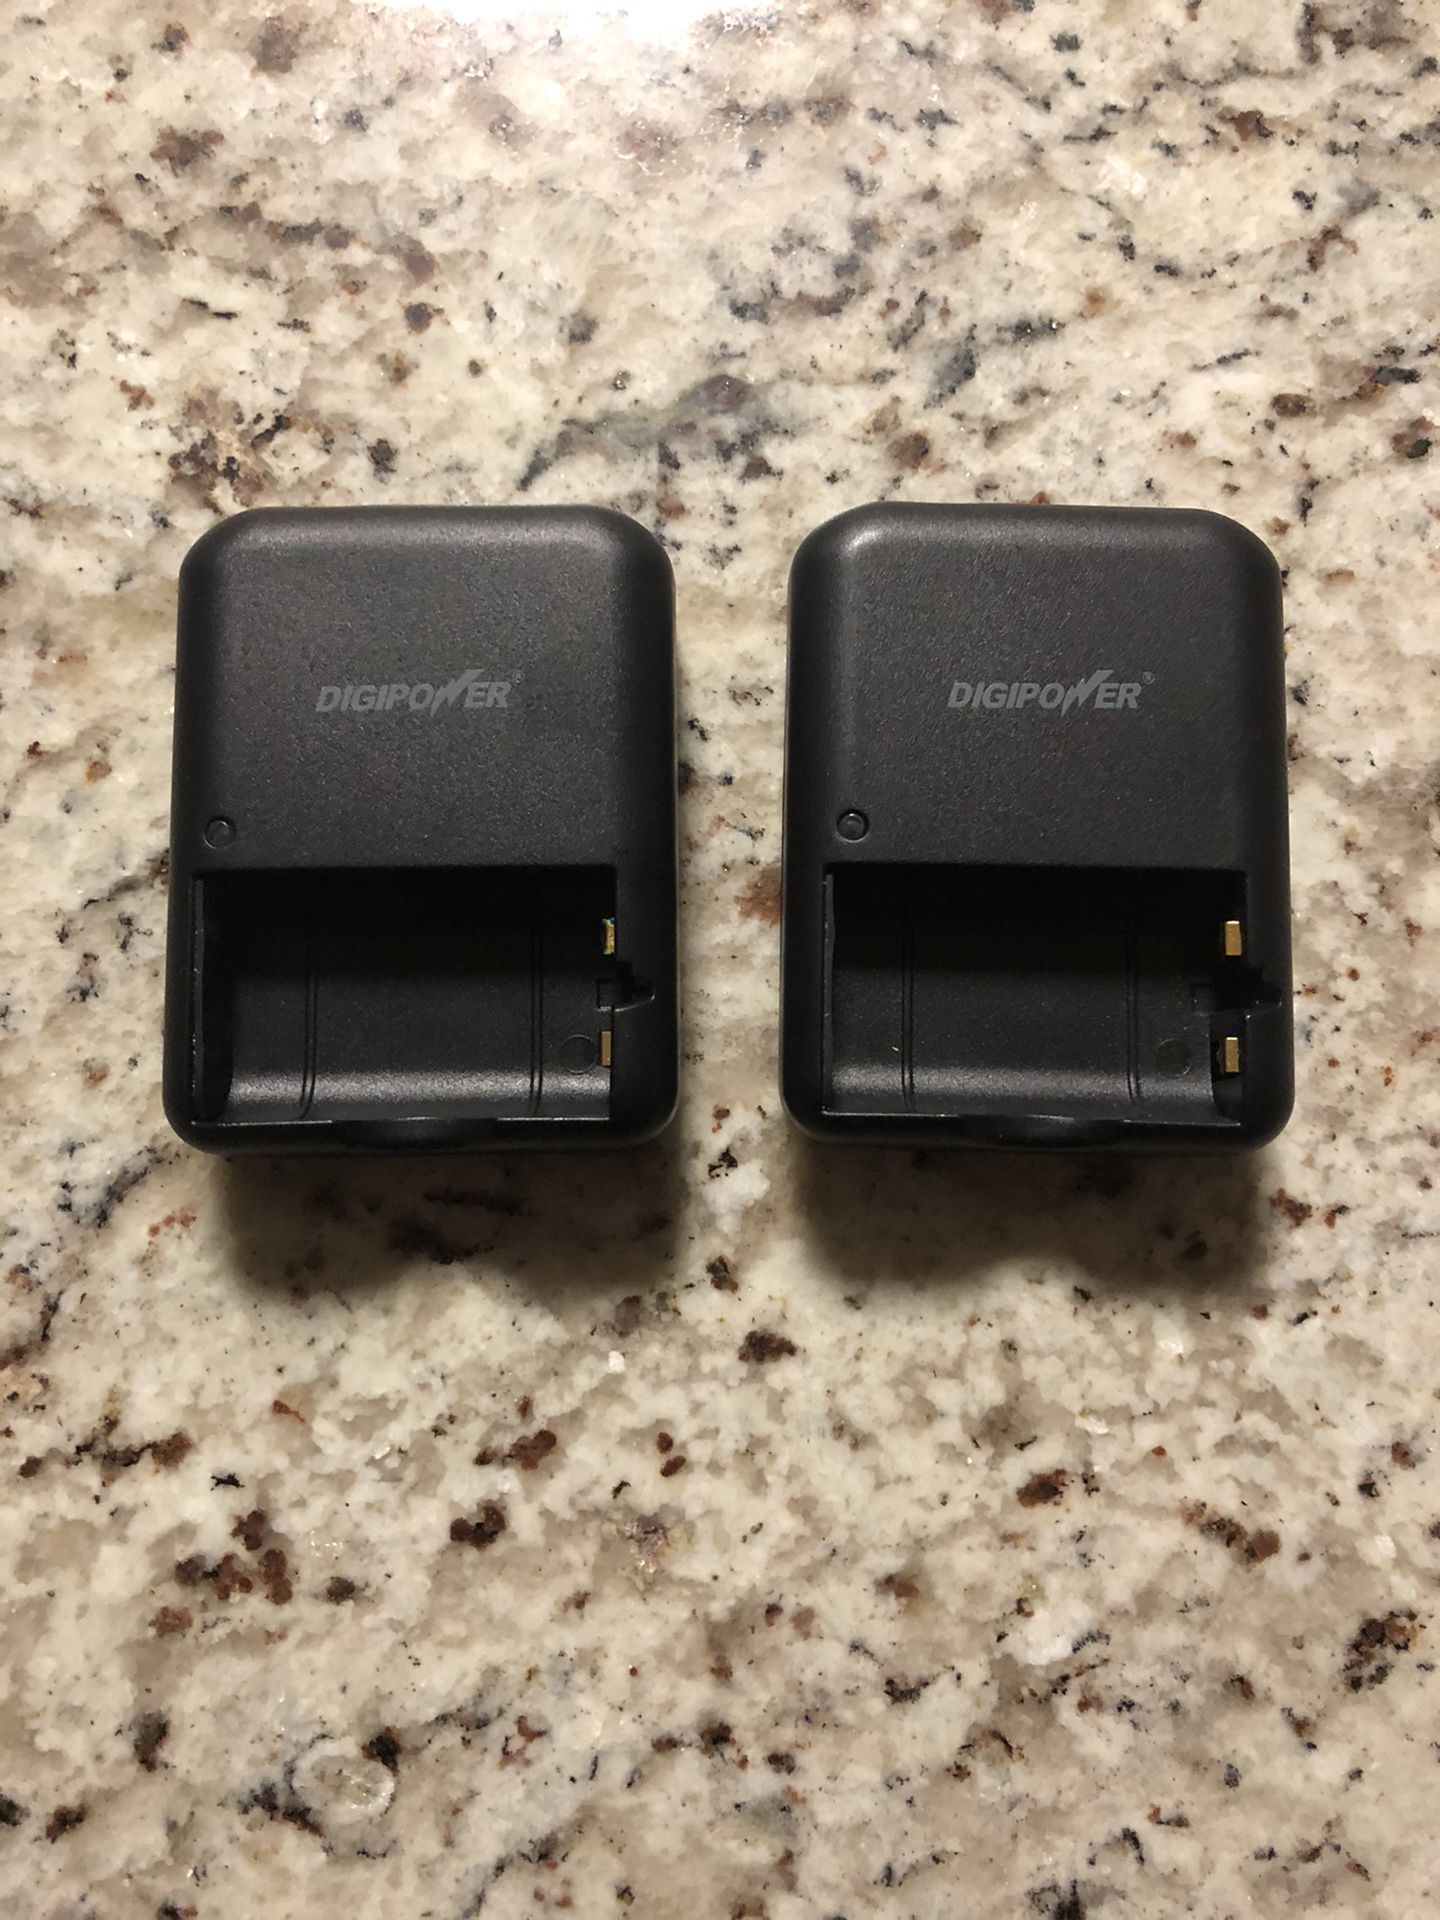 Digipower Battery Chargers